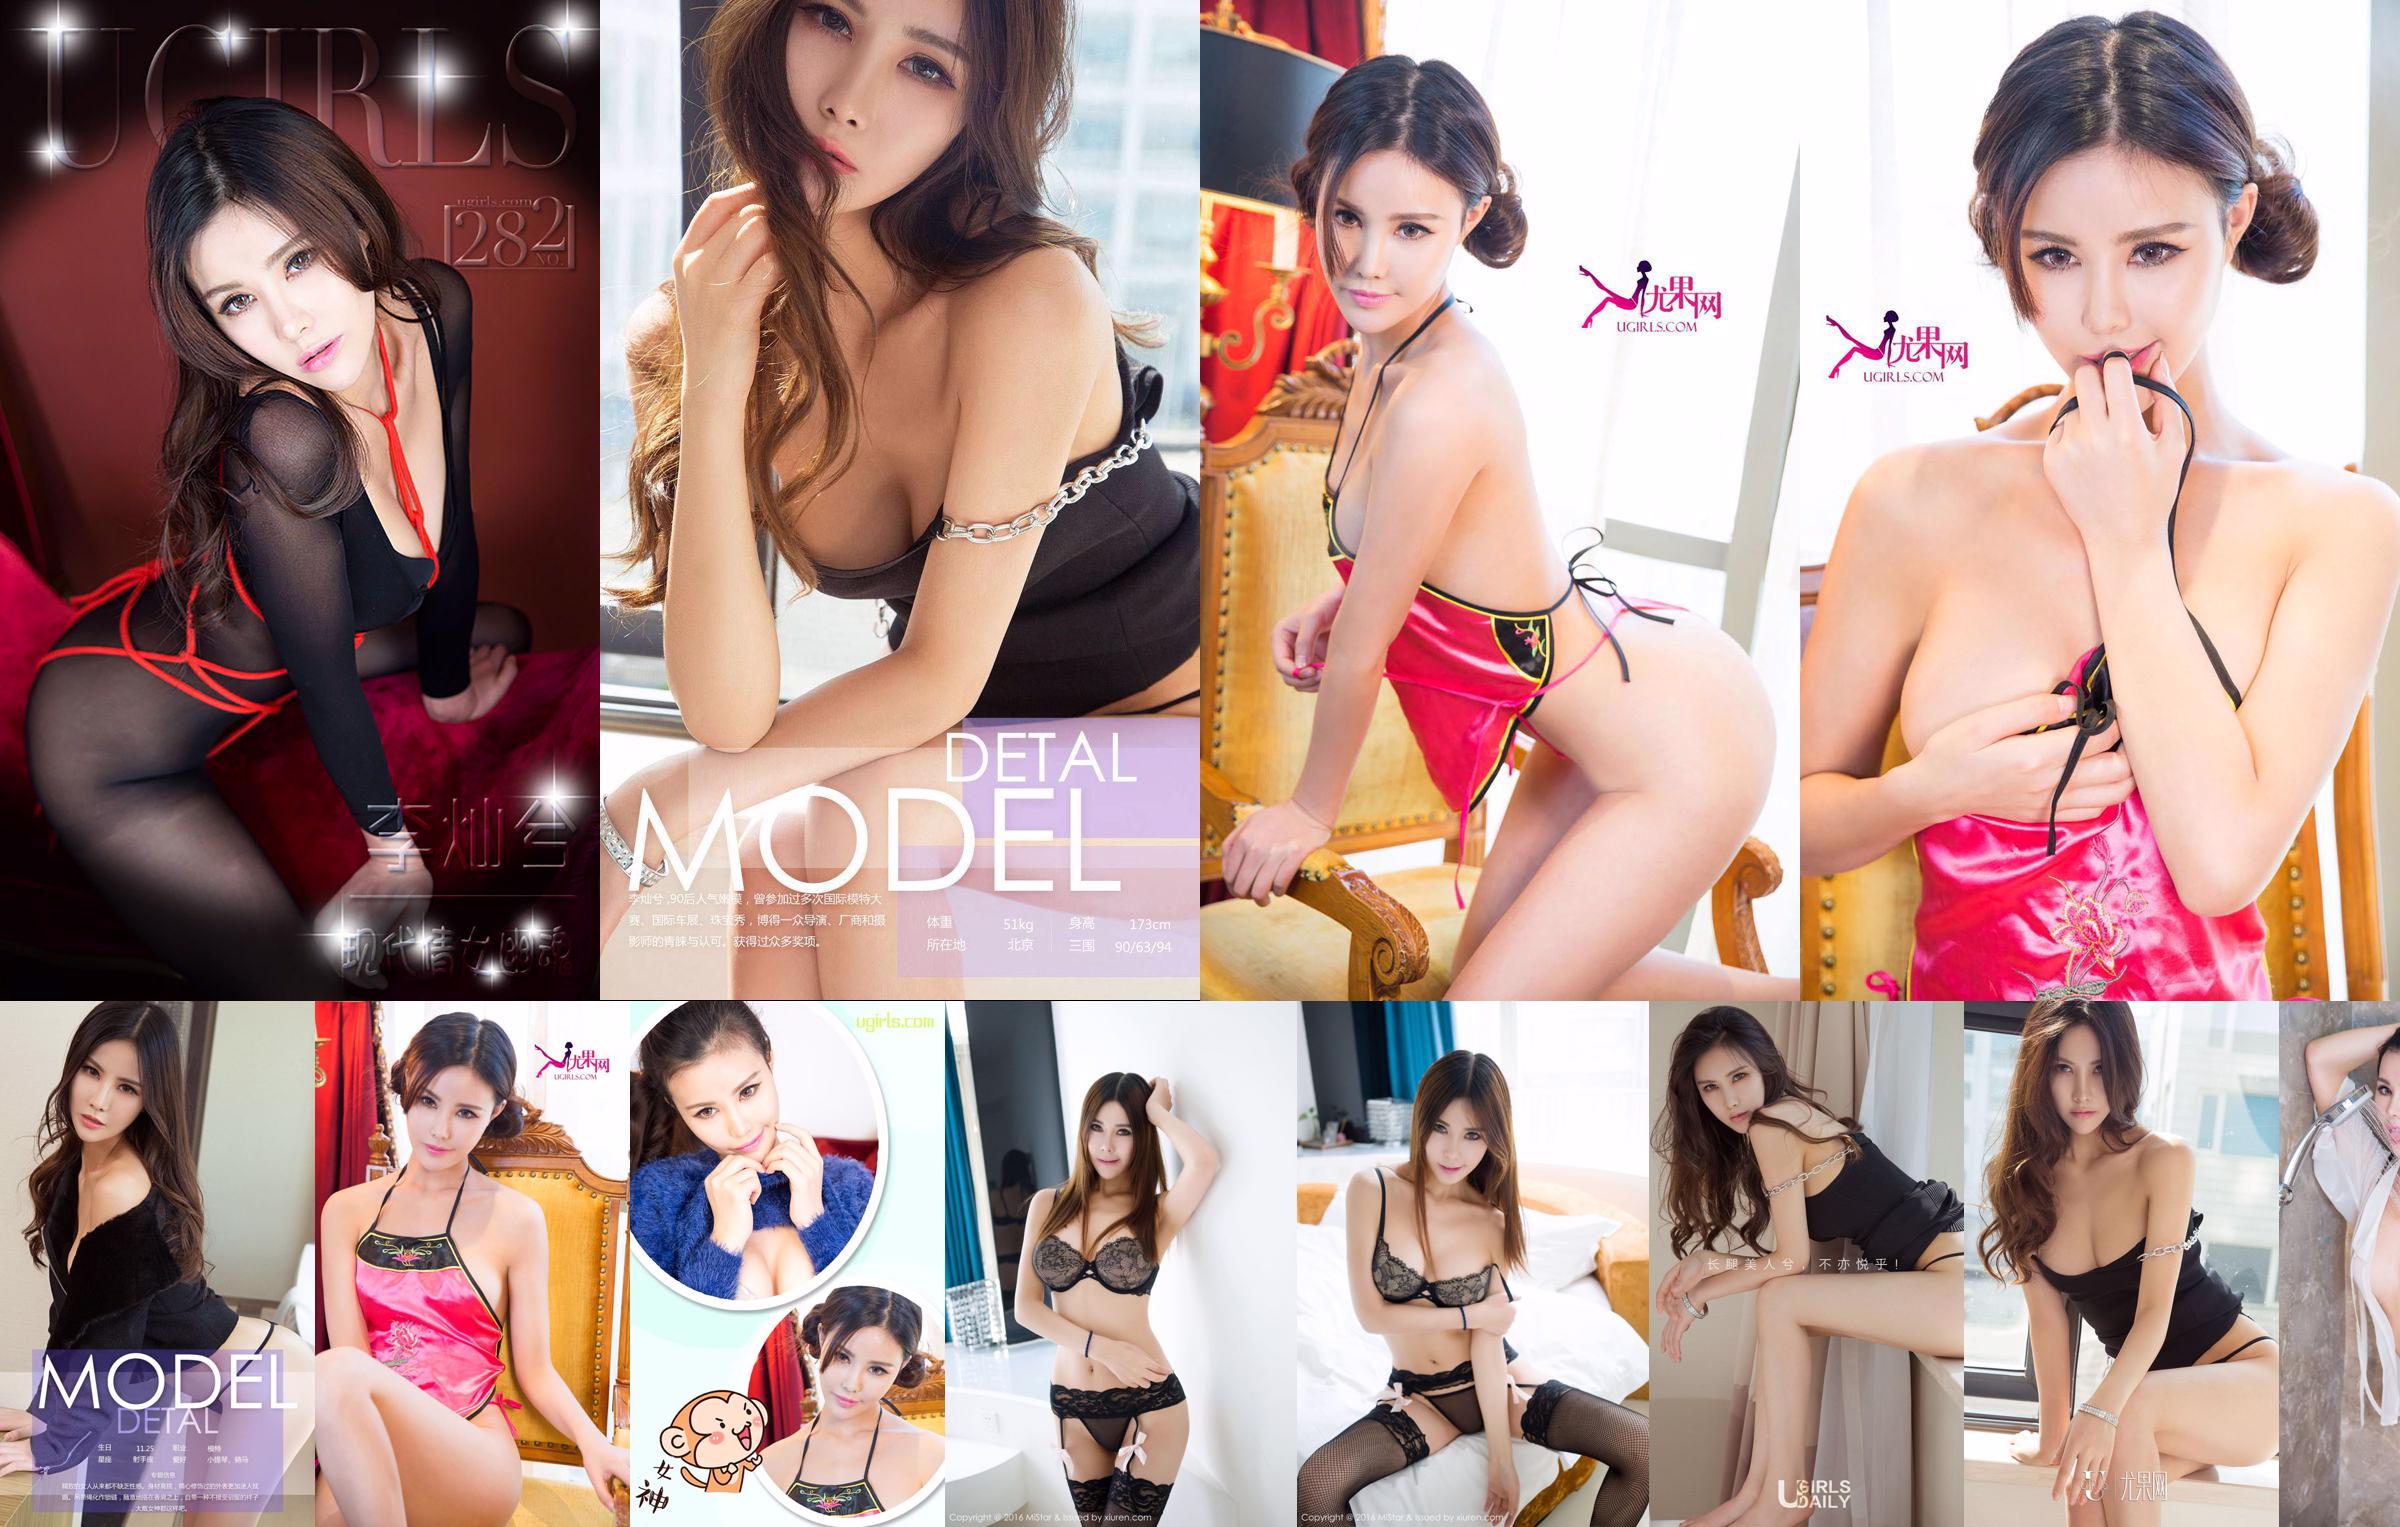 Canxi/Li Canxi "3 sets of sexy lingerie" [MiStar] Vol.097 No.0dc523 Page 4